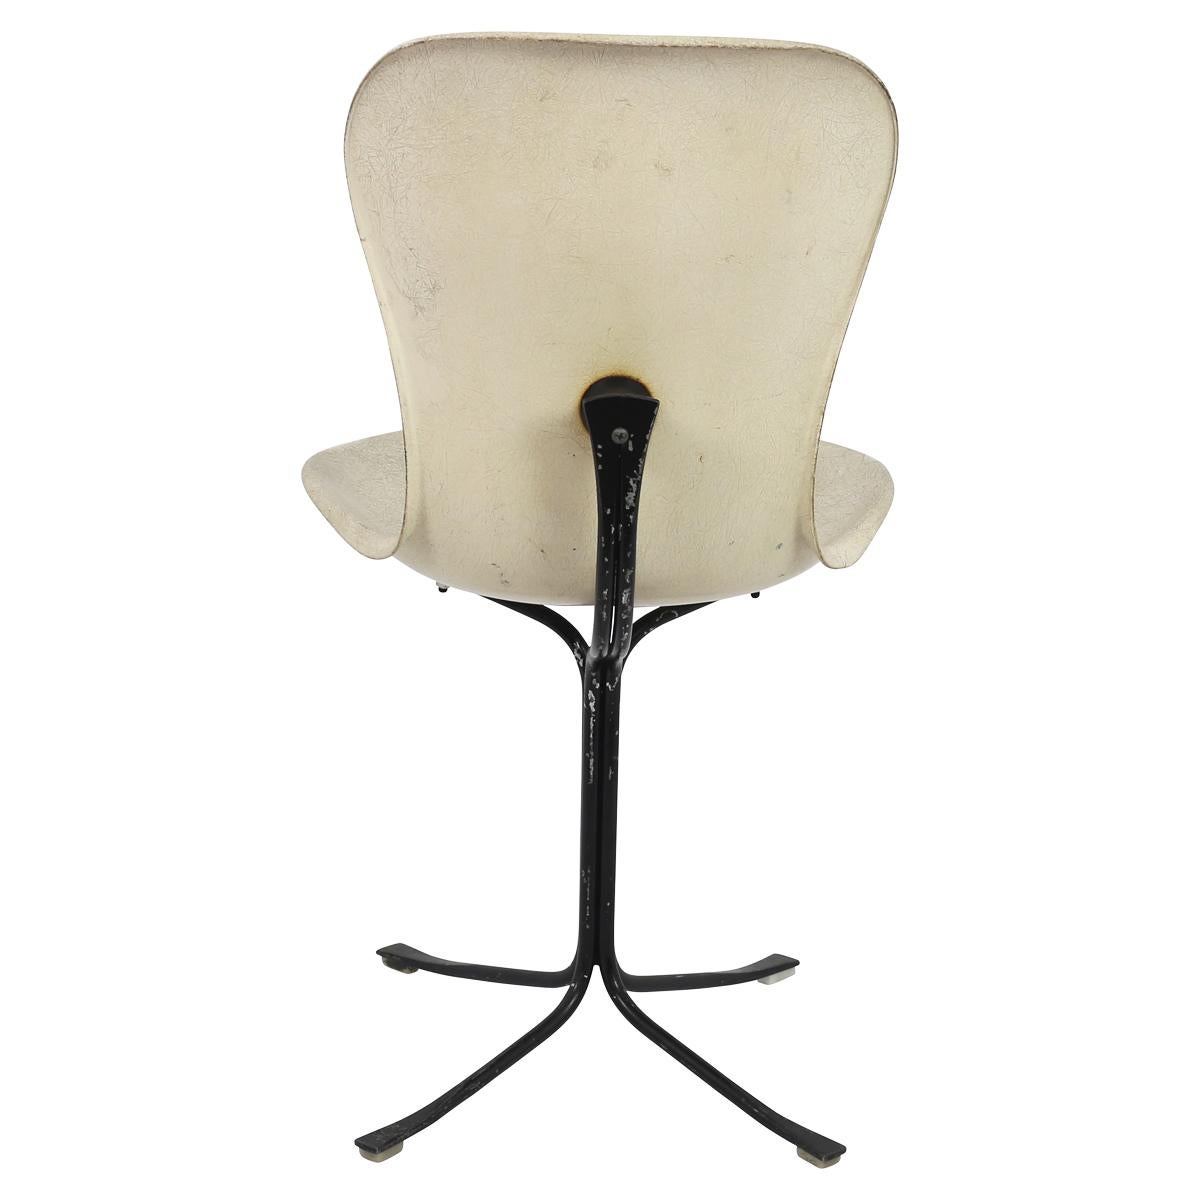 The Ion chair was originally designed for the Seattle Space Needle World’s Fair in 1962.